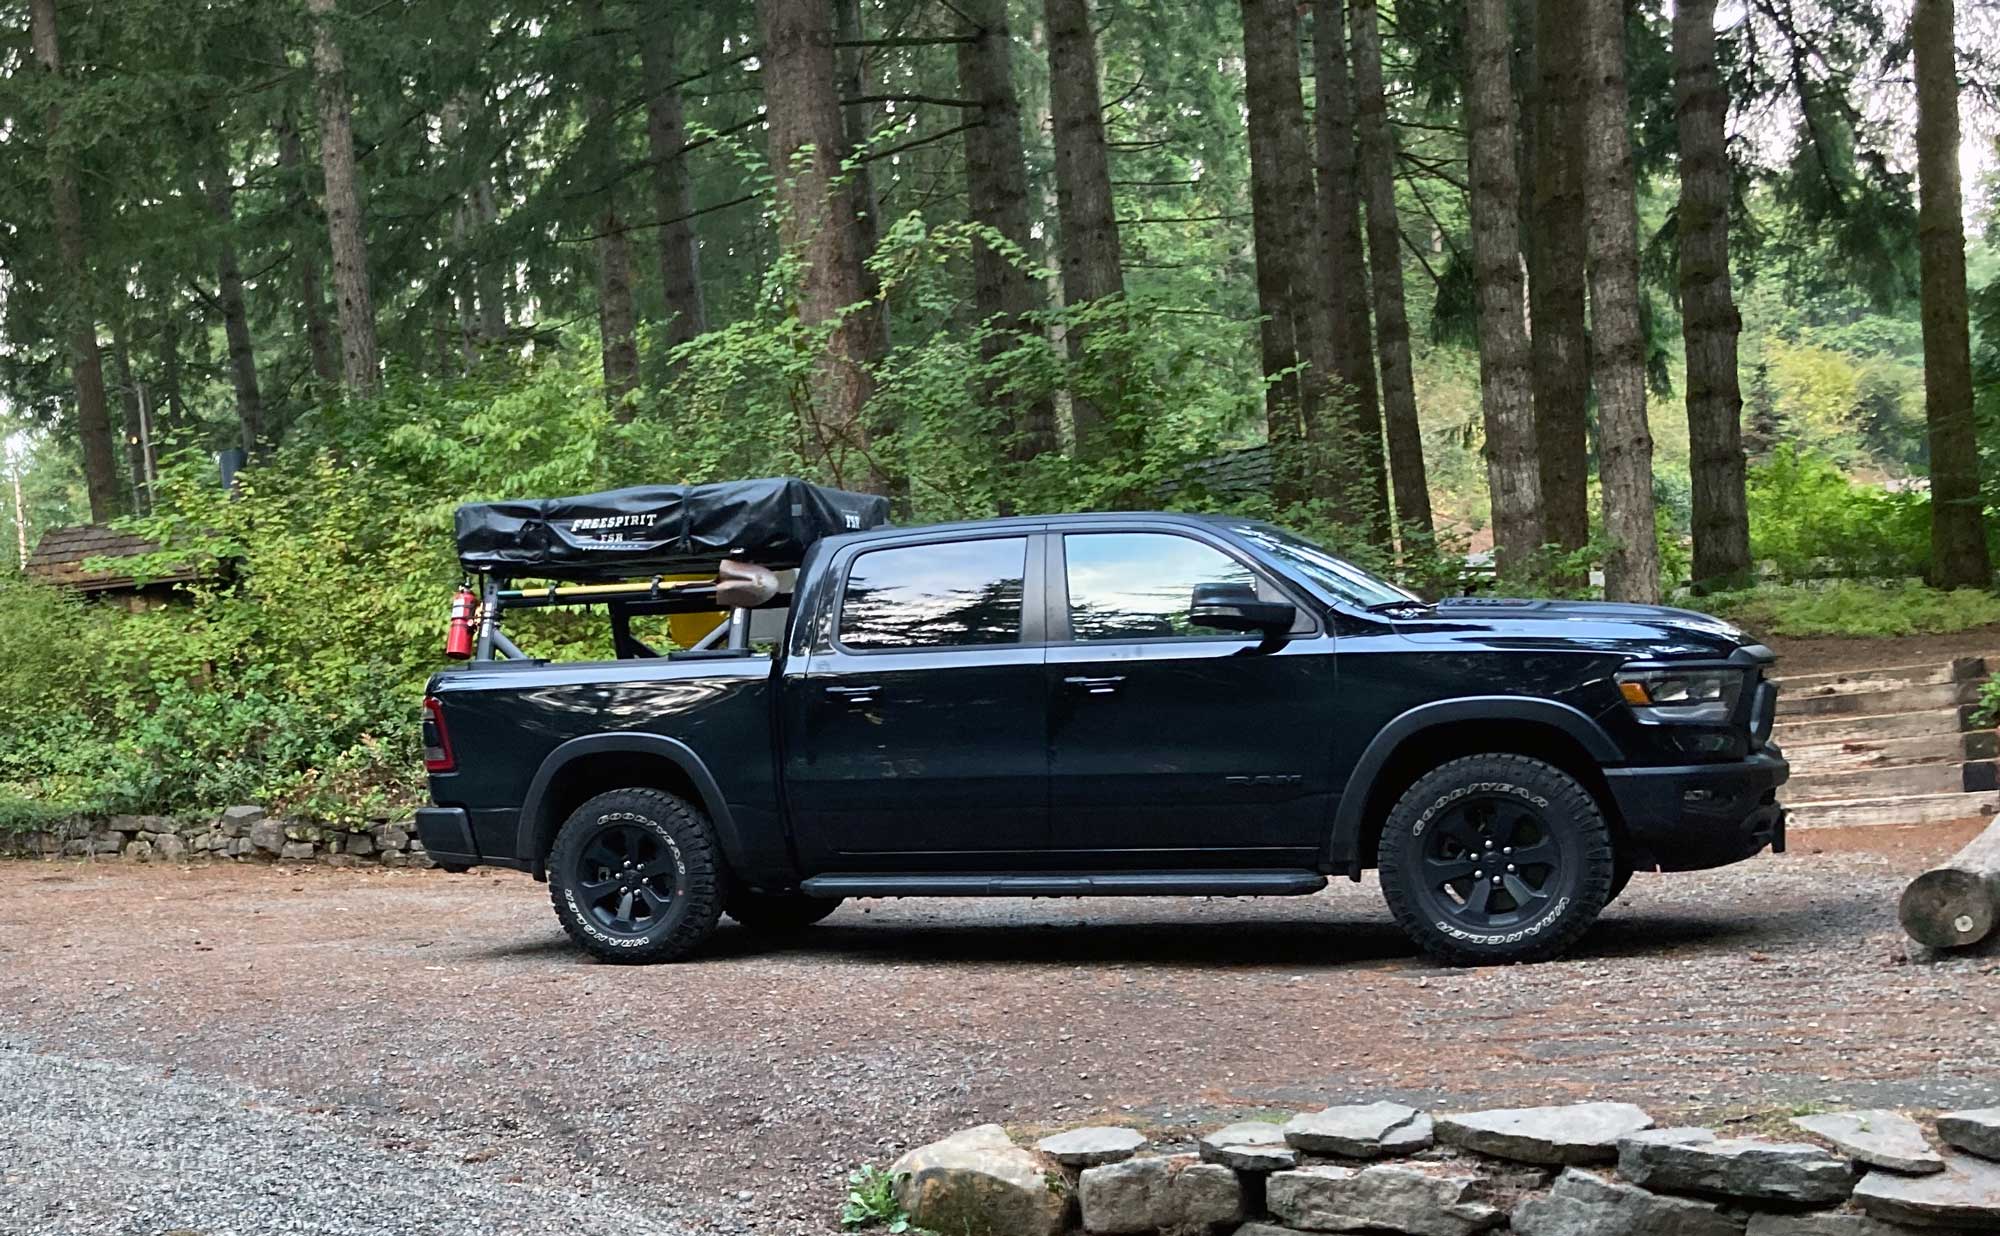 Black Dodge Ran four door truck with rack, roof top tent, shovel mount, and green trees in the background